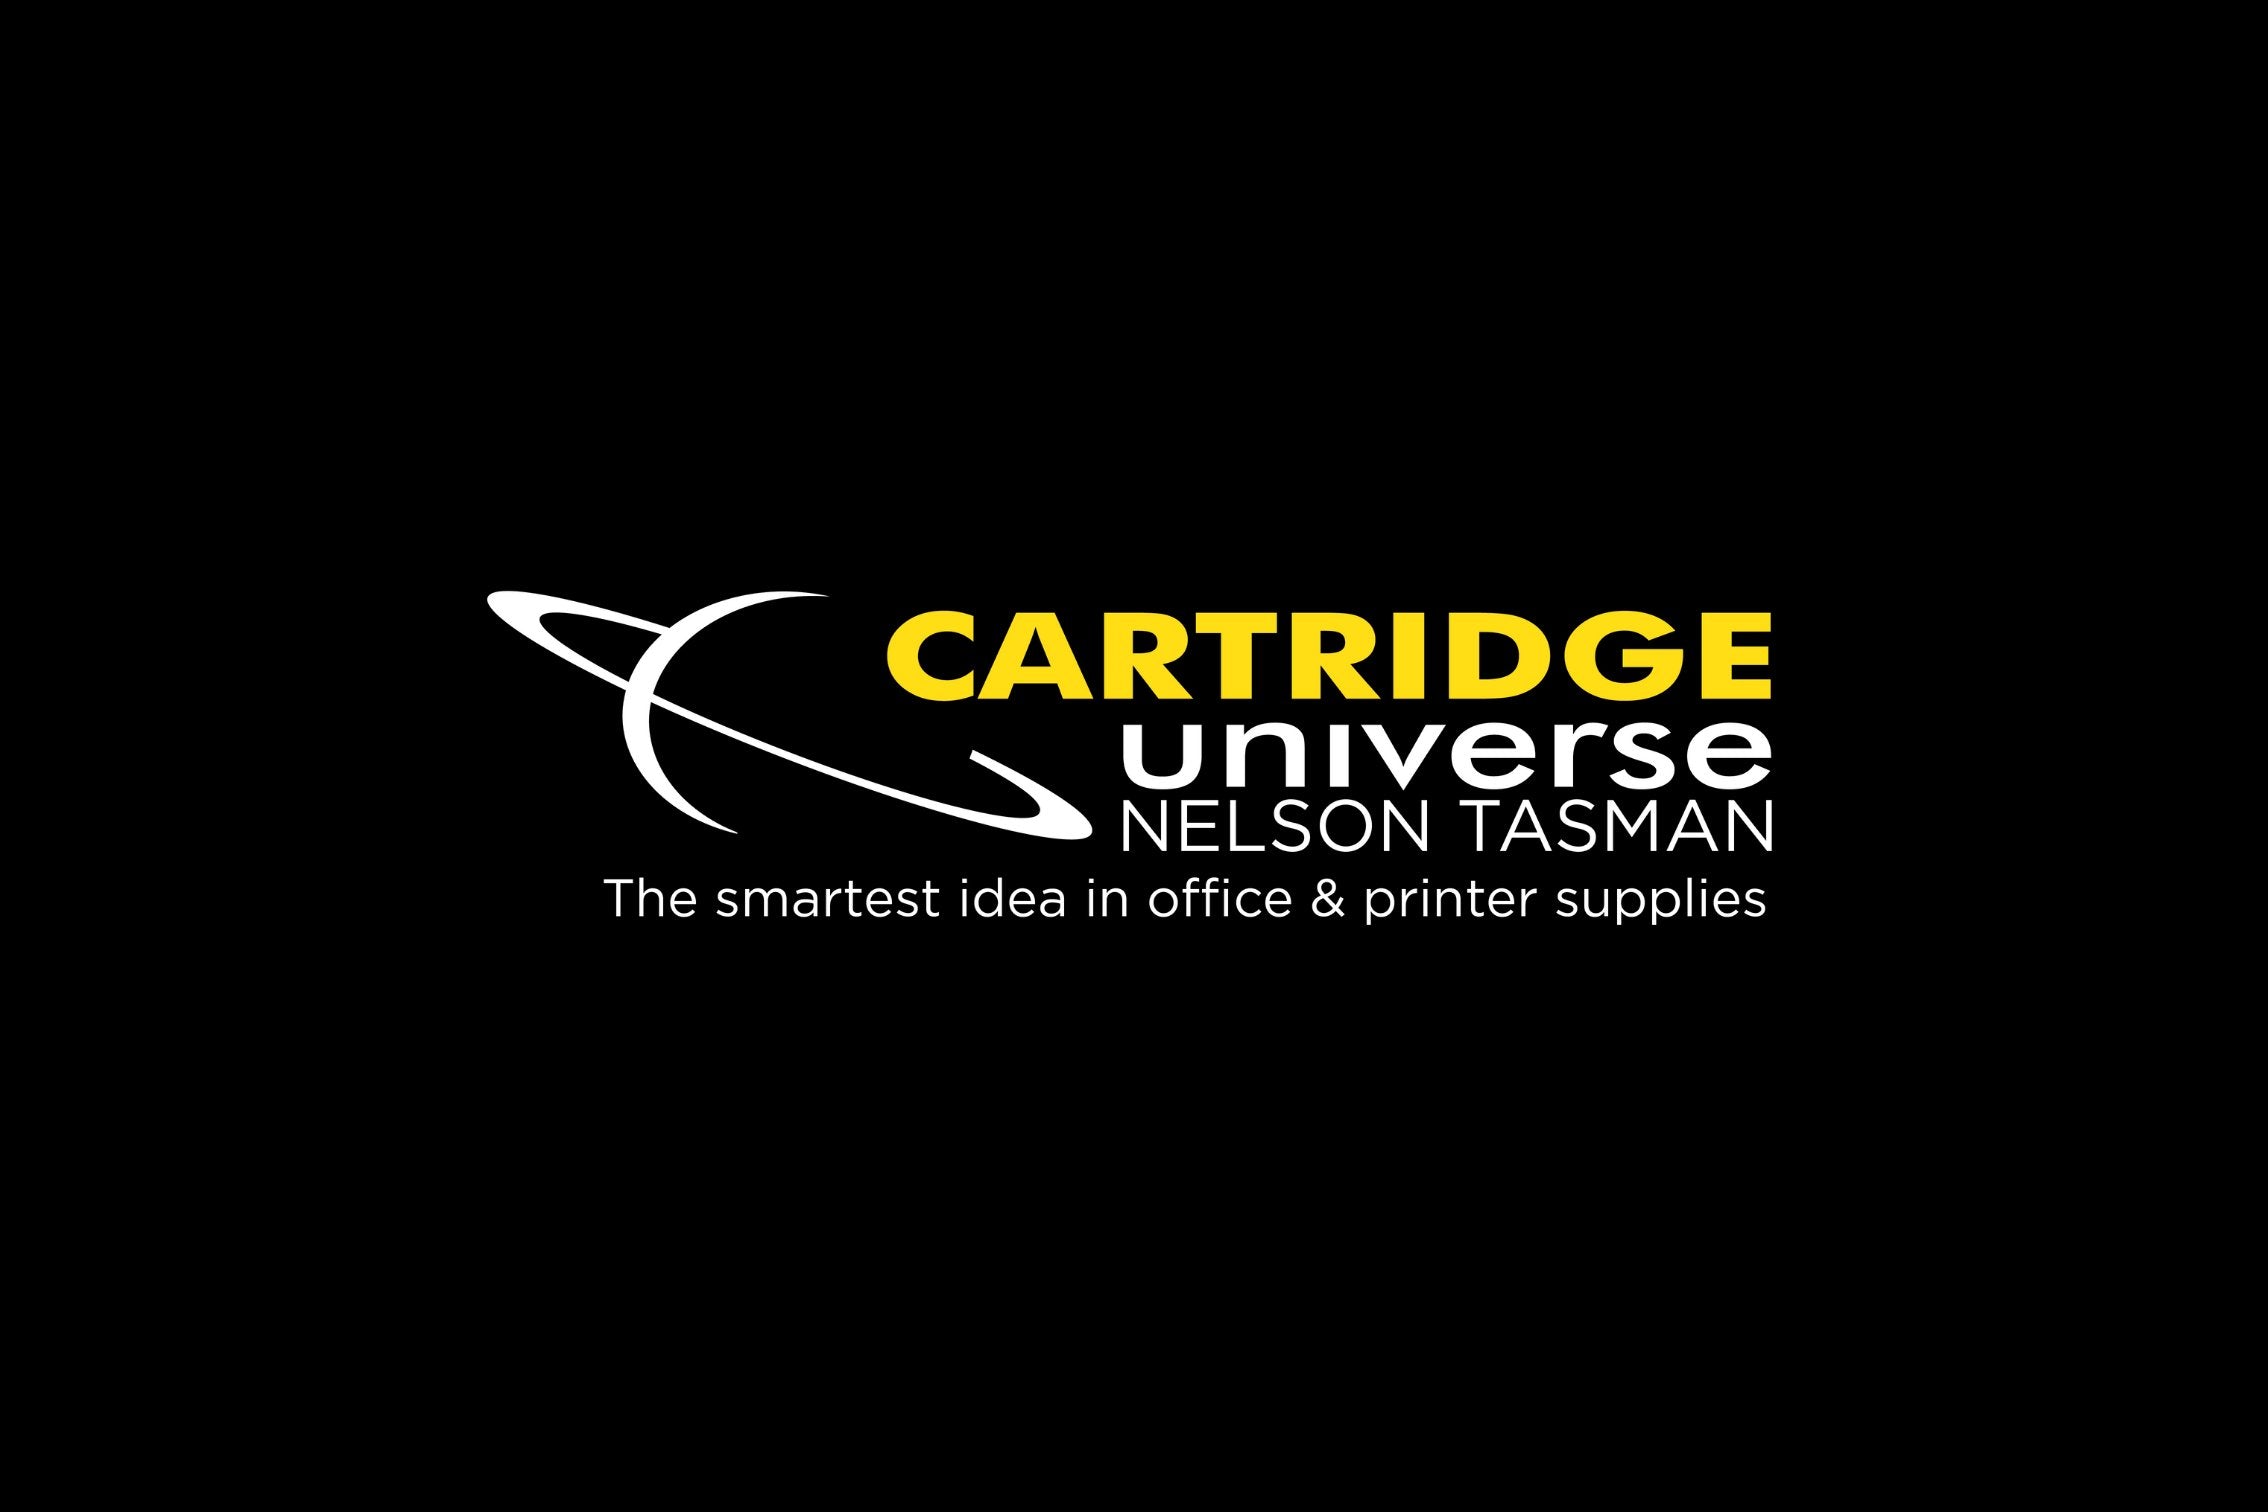 Cartridge Universe or CU Brand Cartridges suit all makes of printers including Brother, Canon, Epson, HP, OKI, Samsung, Kyocera